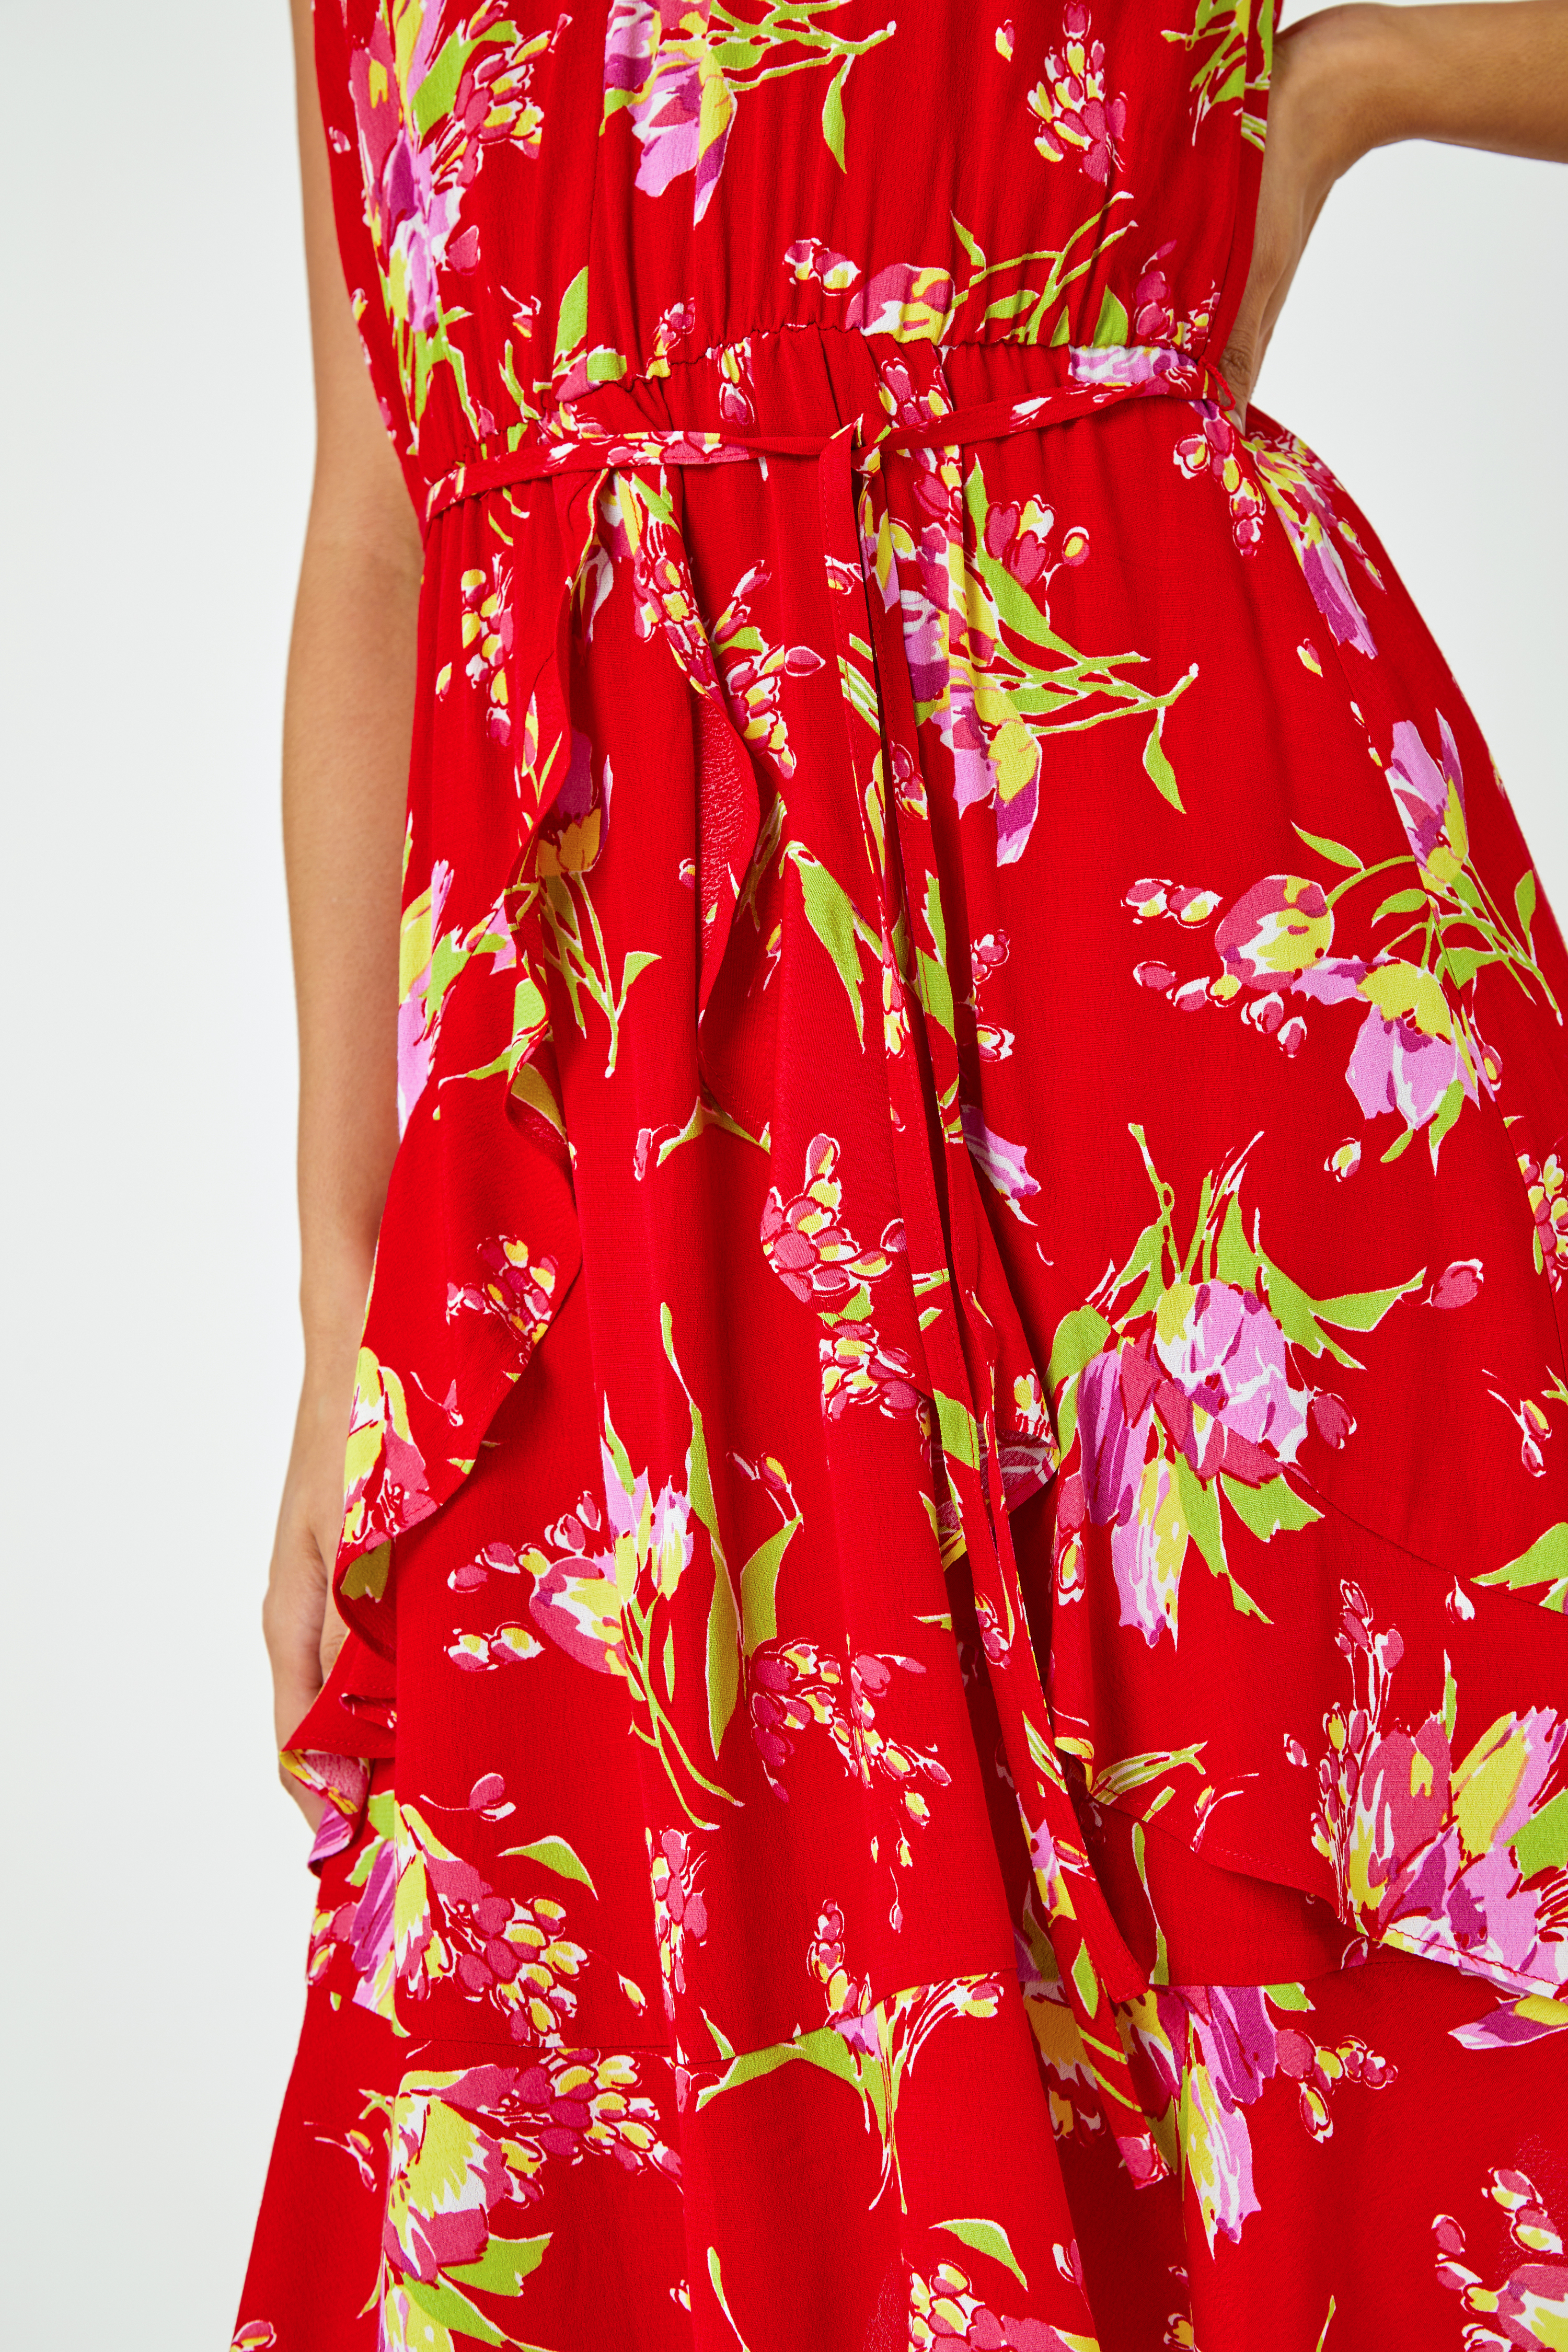 Red Floral Frill Detail Fit & Flare Dress, Image 5 of 5